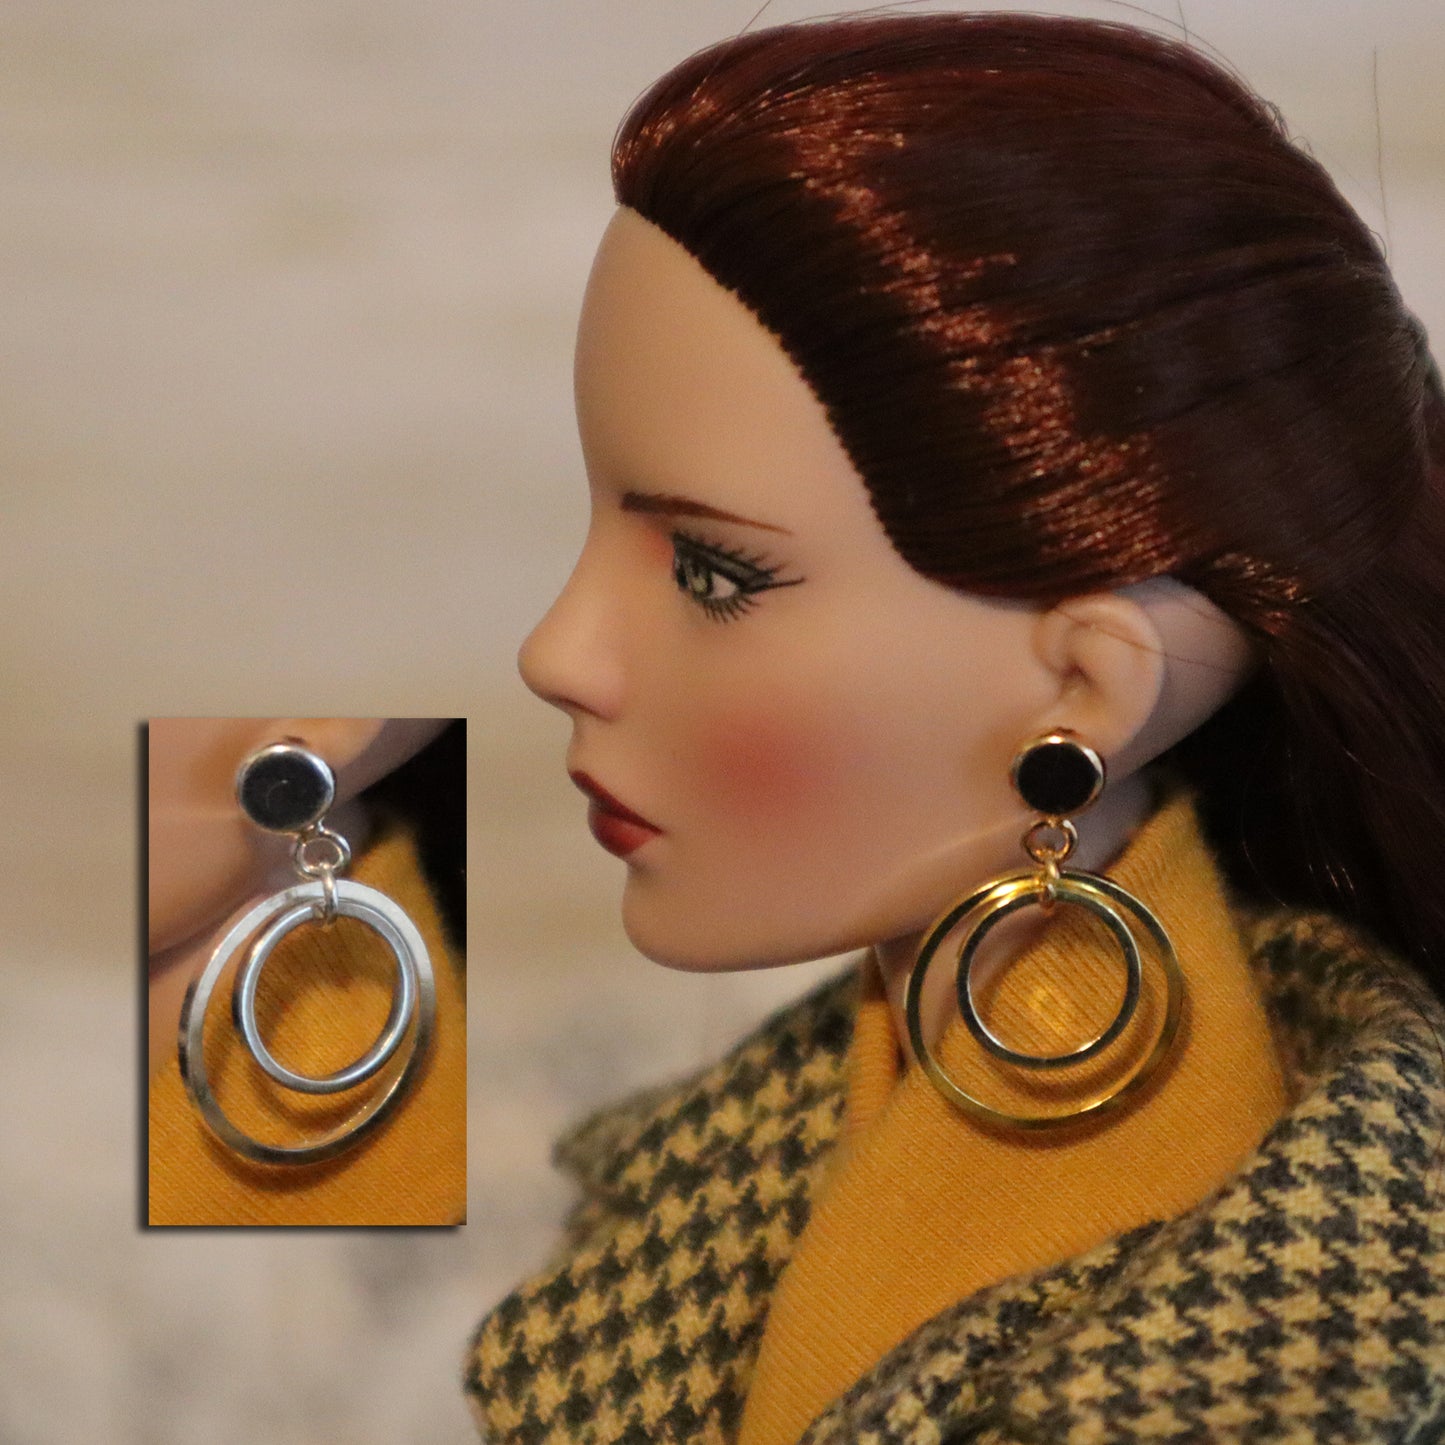 No-Hole Earring for Vinlyl Dolls - Mini Round Double Hoops (Silver or Gold)